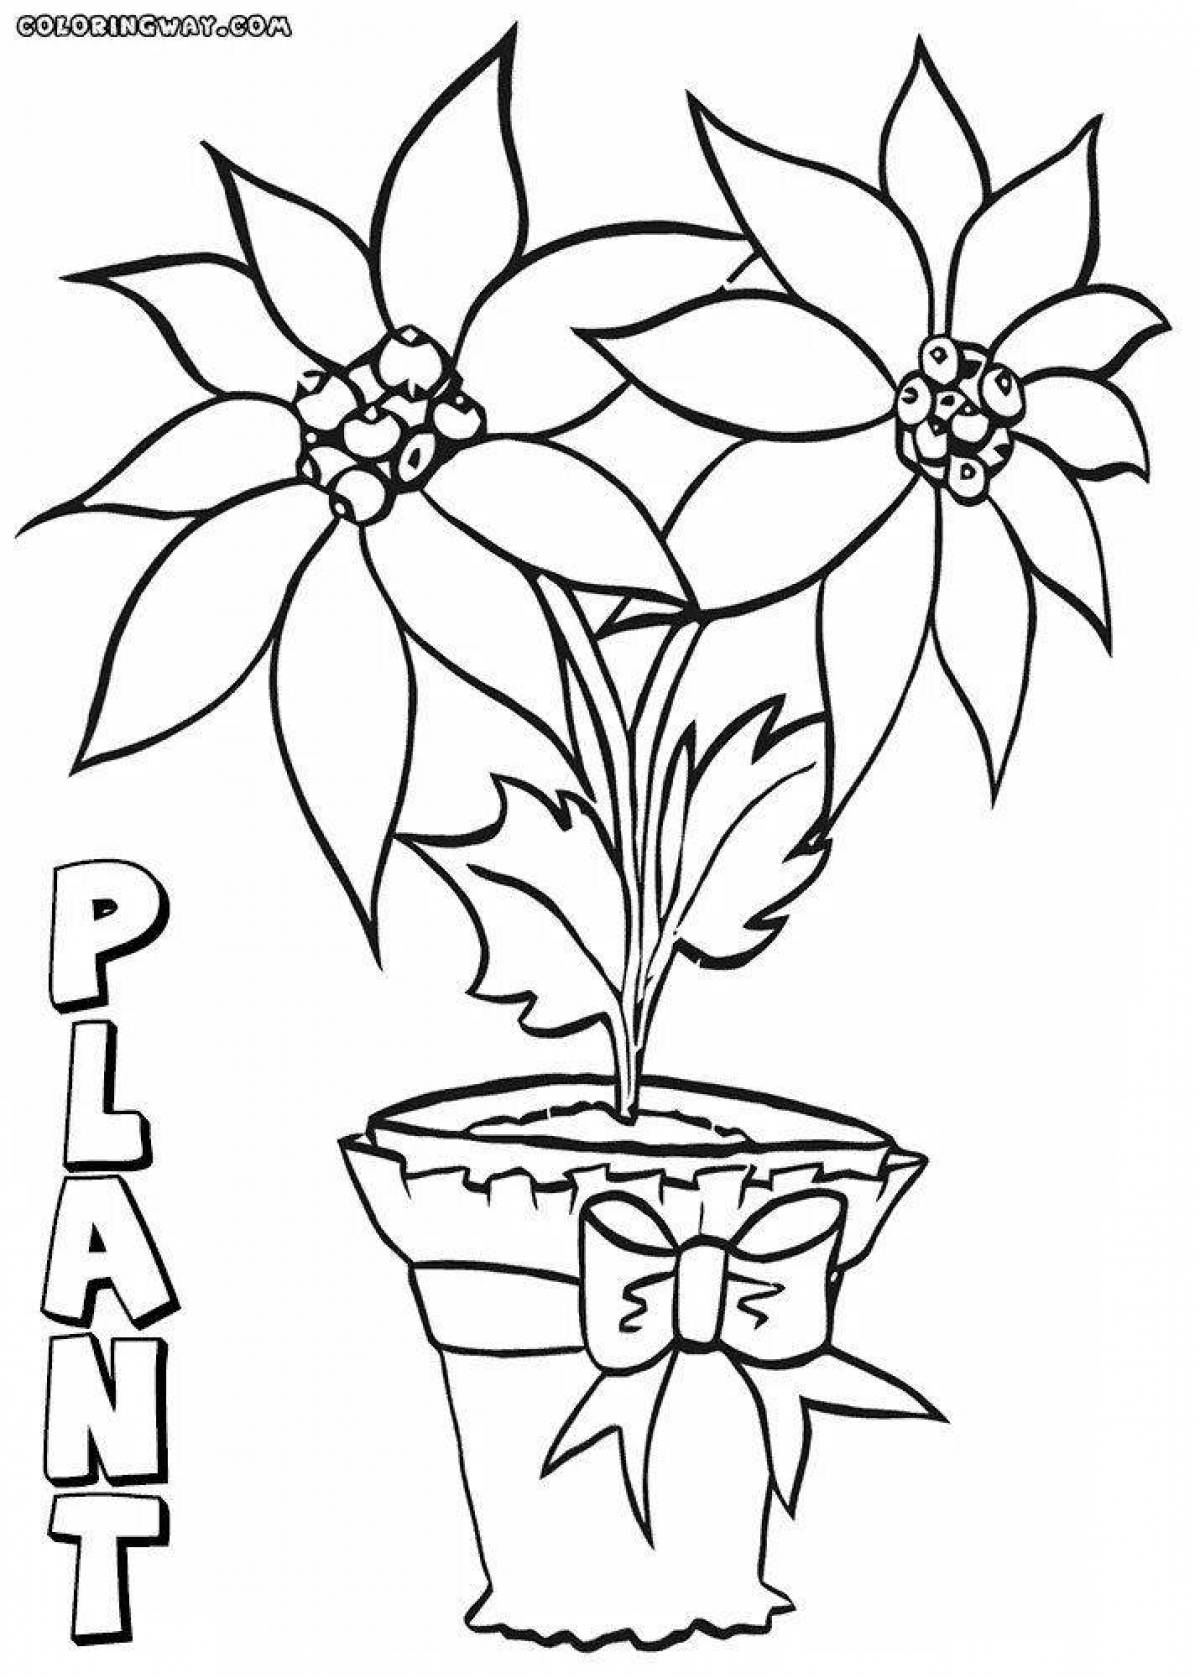 Peace coloring senior group indoor plants